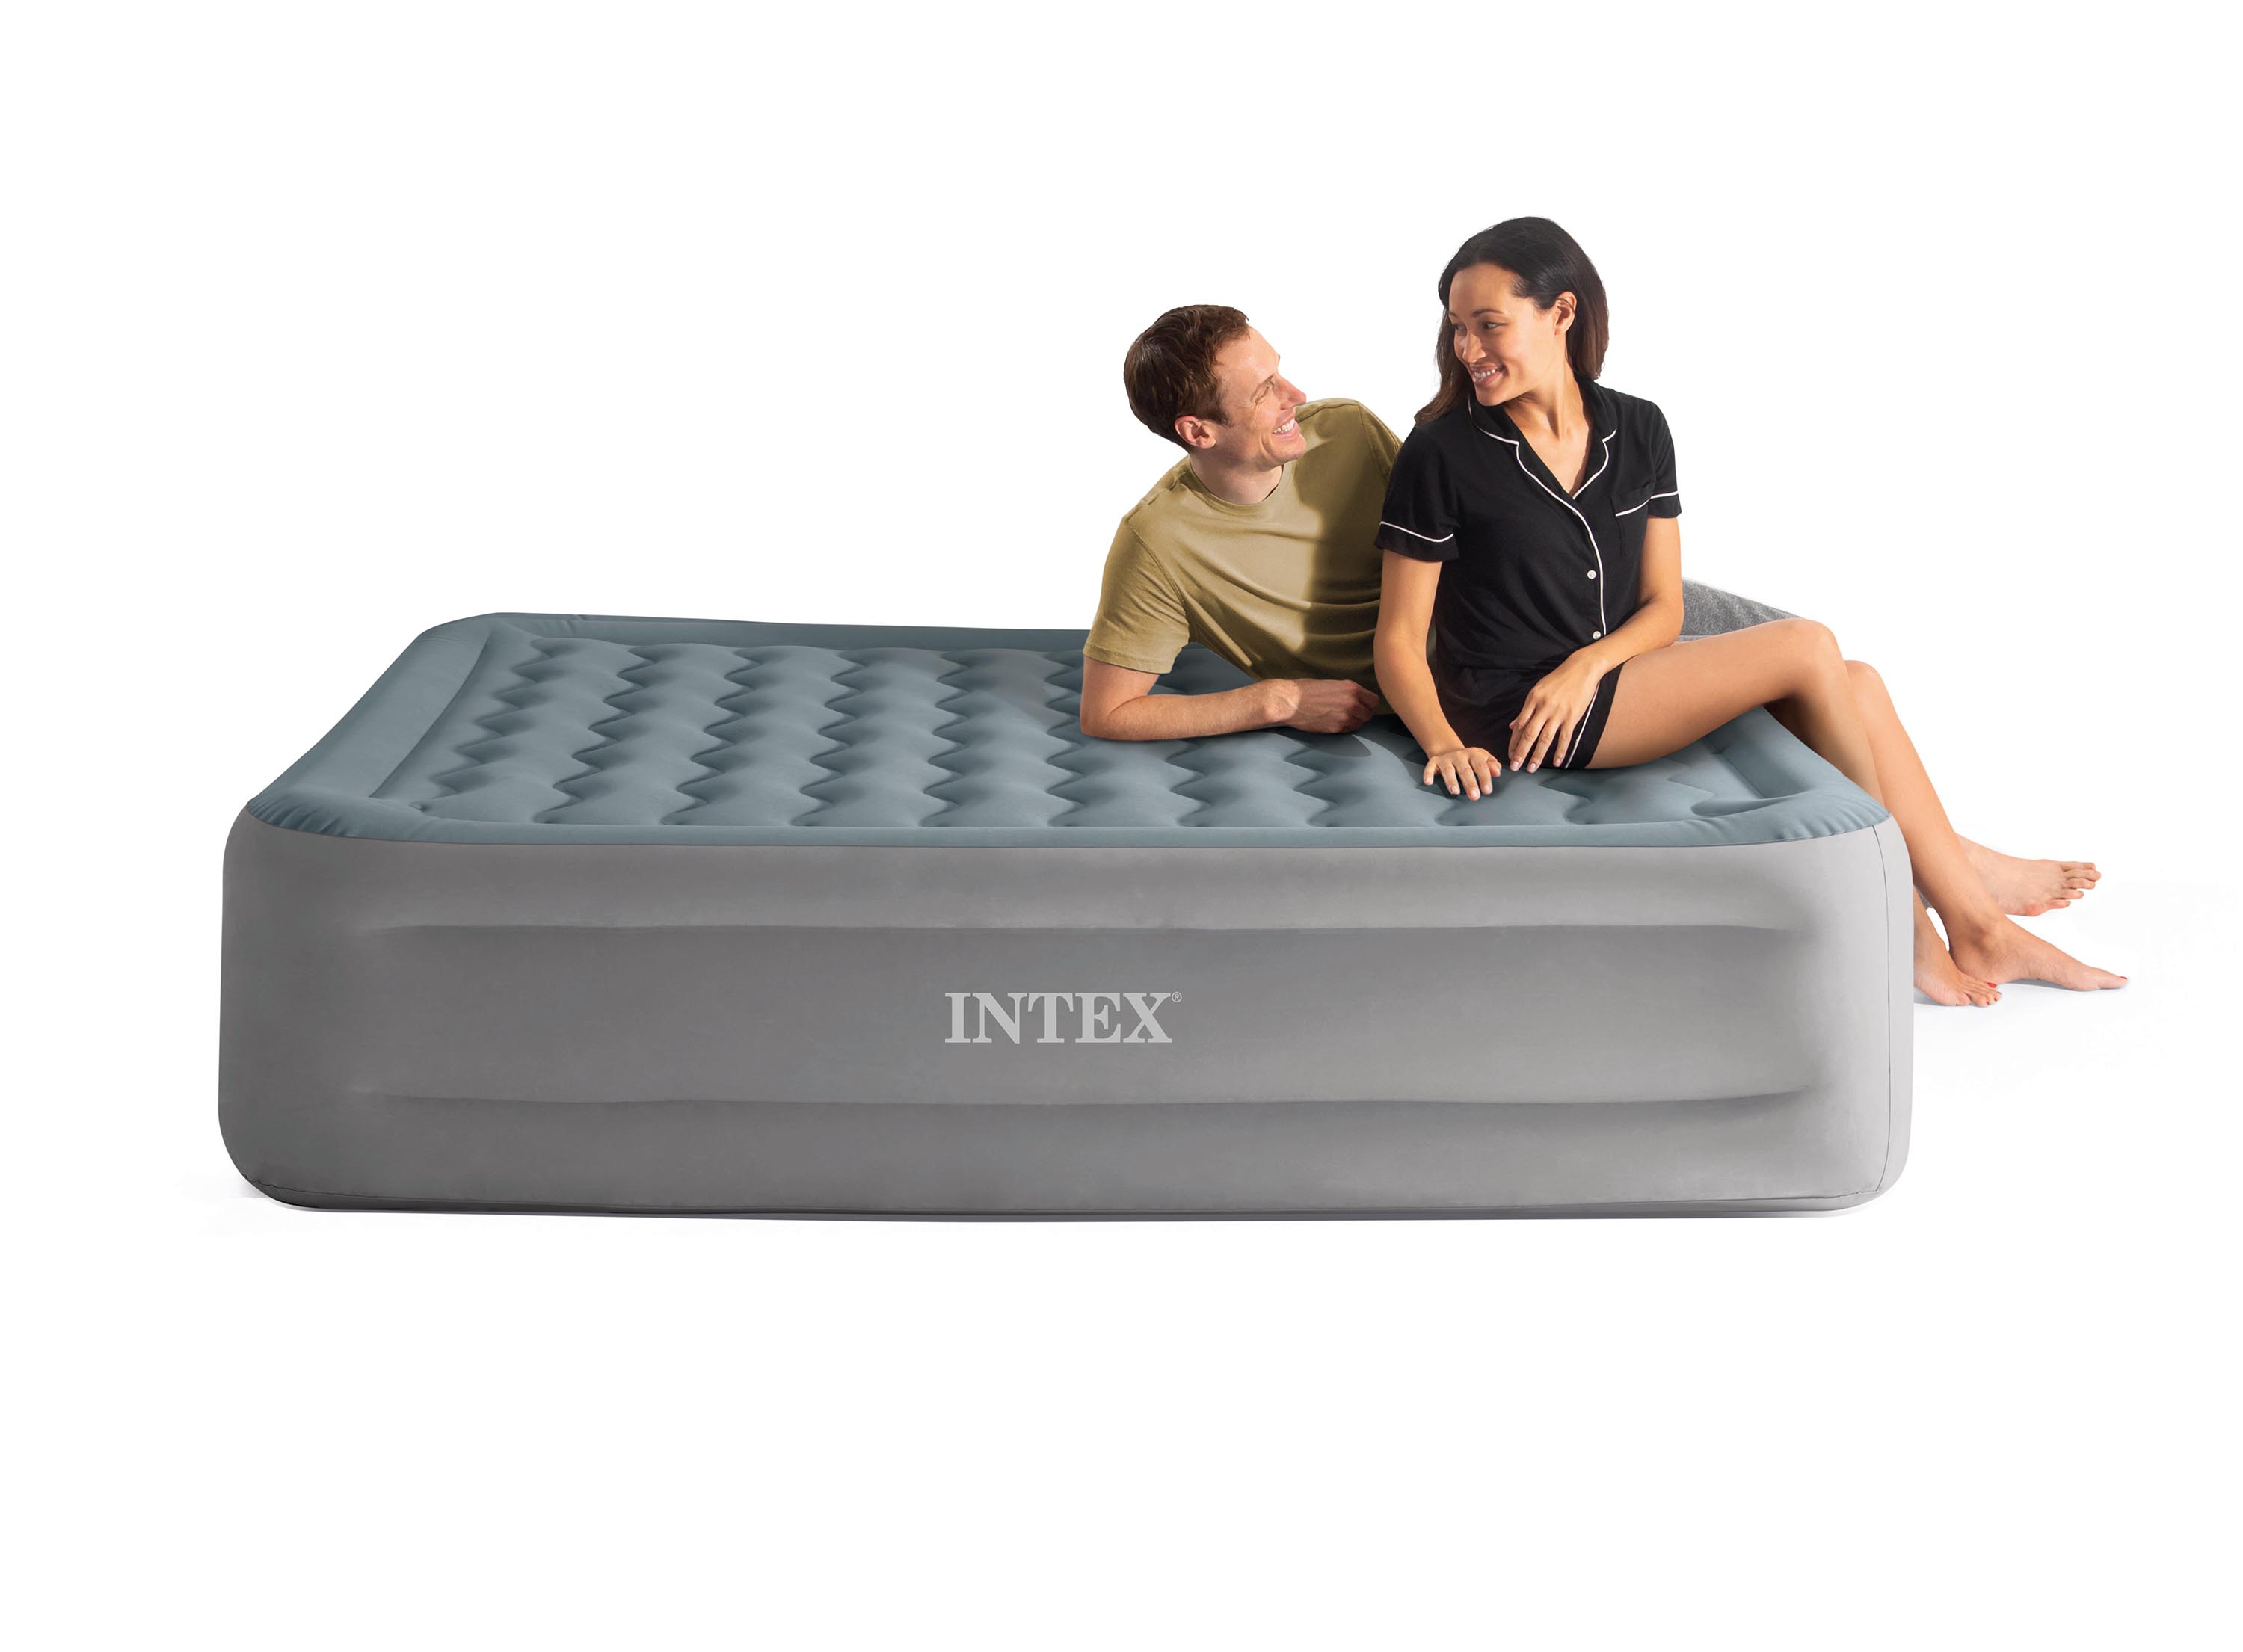 Intex 18" High Comfort Plush Raised Air Mattress Bed with Built-in Pump - Queen - image 2 of 10